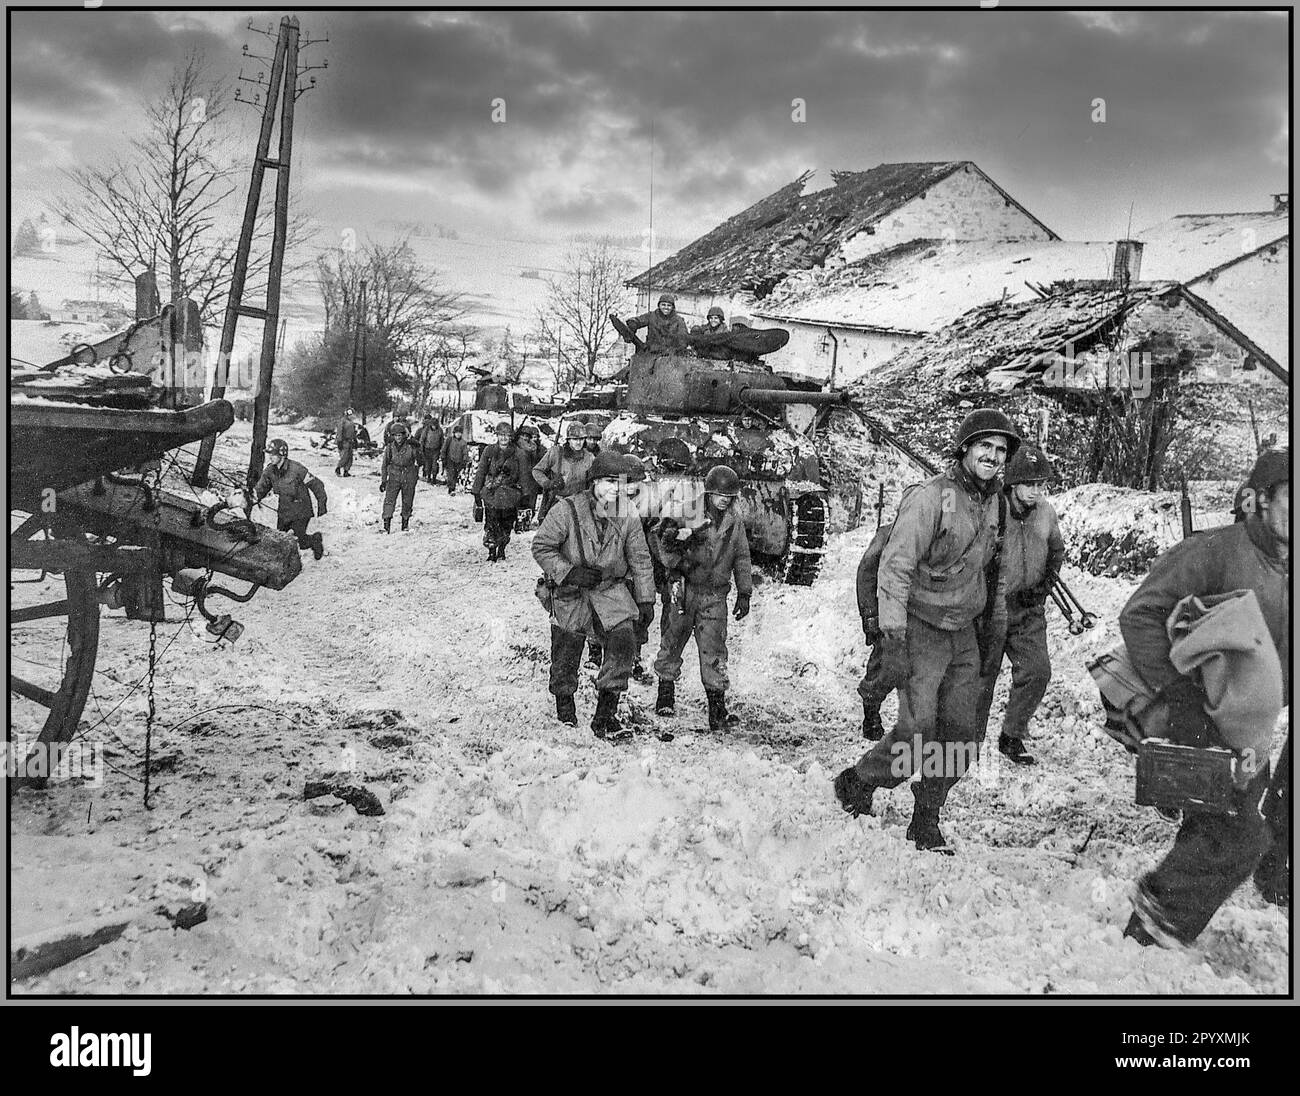 BATTLE OF THE BULGE WW2 American soldiers slog through the mud and snow during the Battle of the Bulge in December 1944. It was the coldest winter in 50 years in Europe and developed into the biggest battle with Nazi Germany Occupation on the Western Front during World War II. Stock Photo